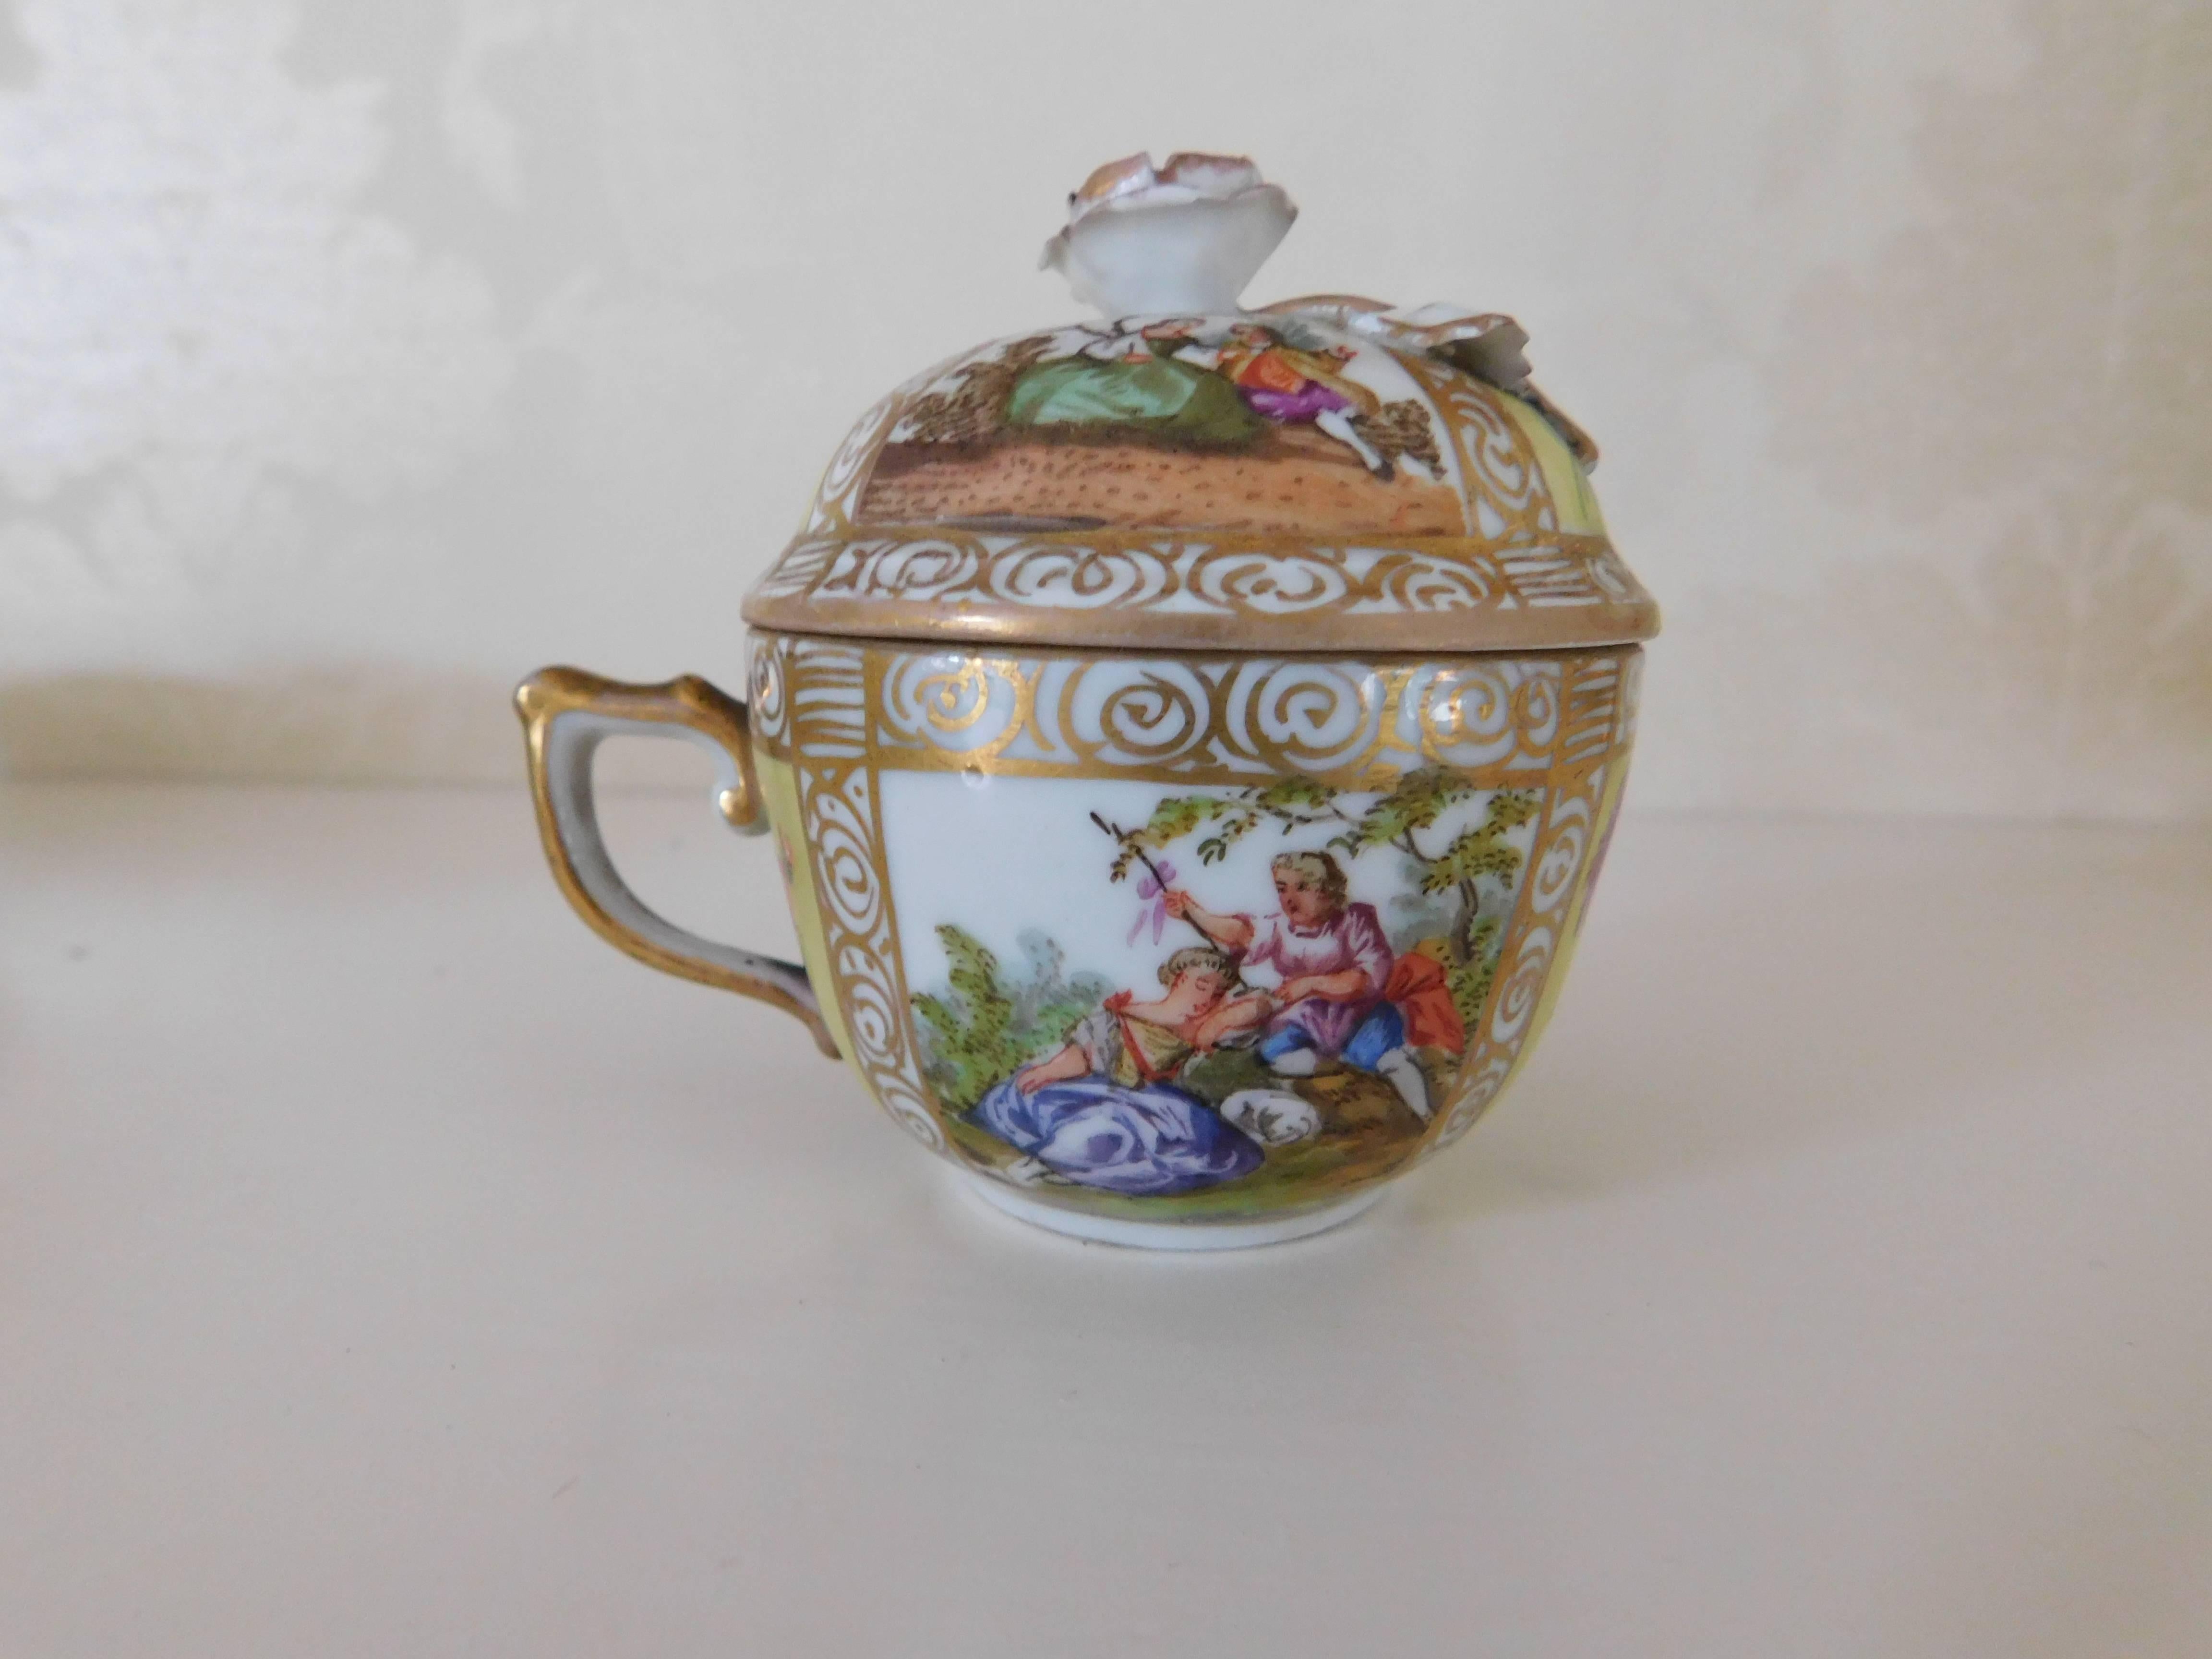 19th century Meissen porcelain chocolate cup, lid and saucer.